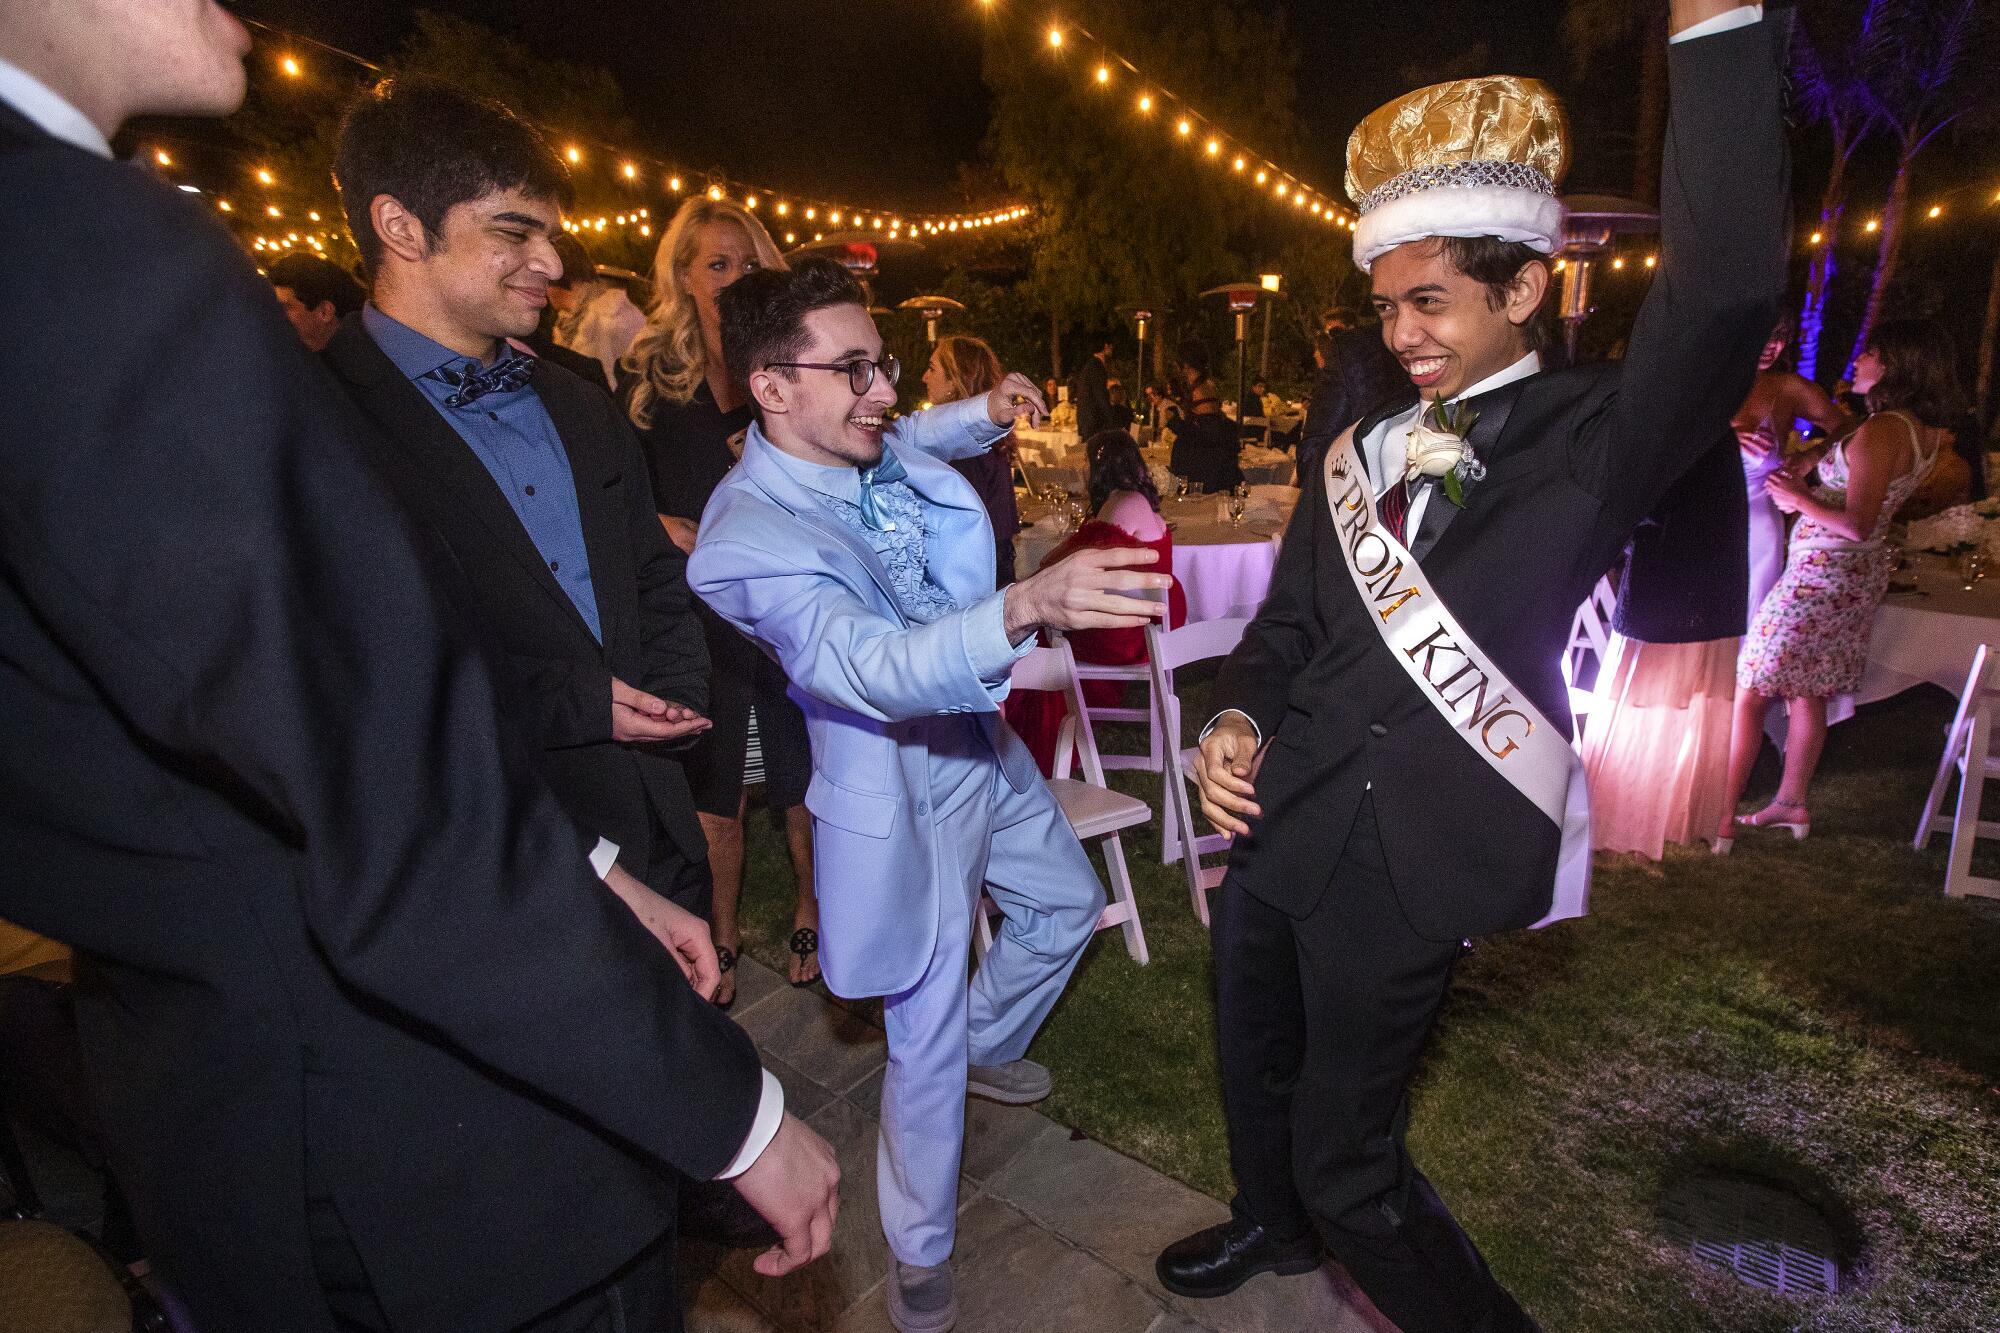 Teenagers in suits dance while one wears a crown and "Prom King" sash